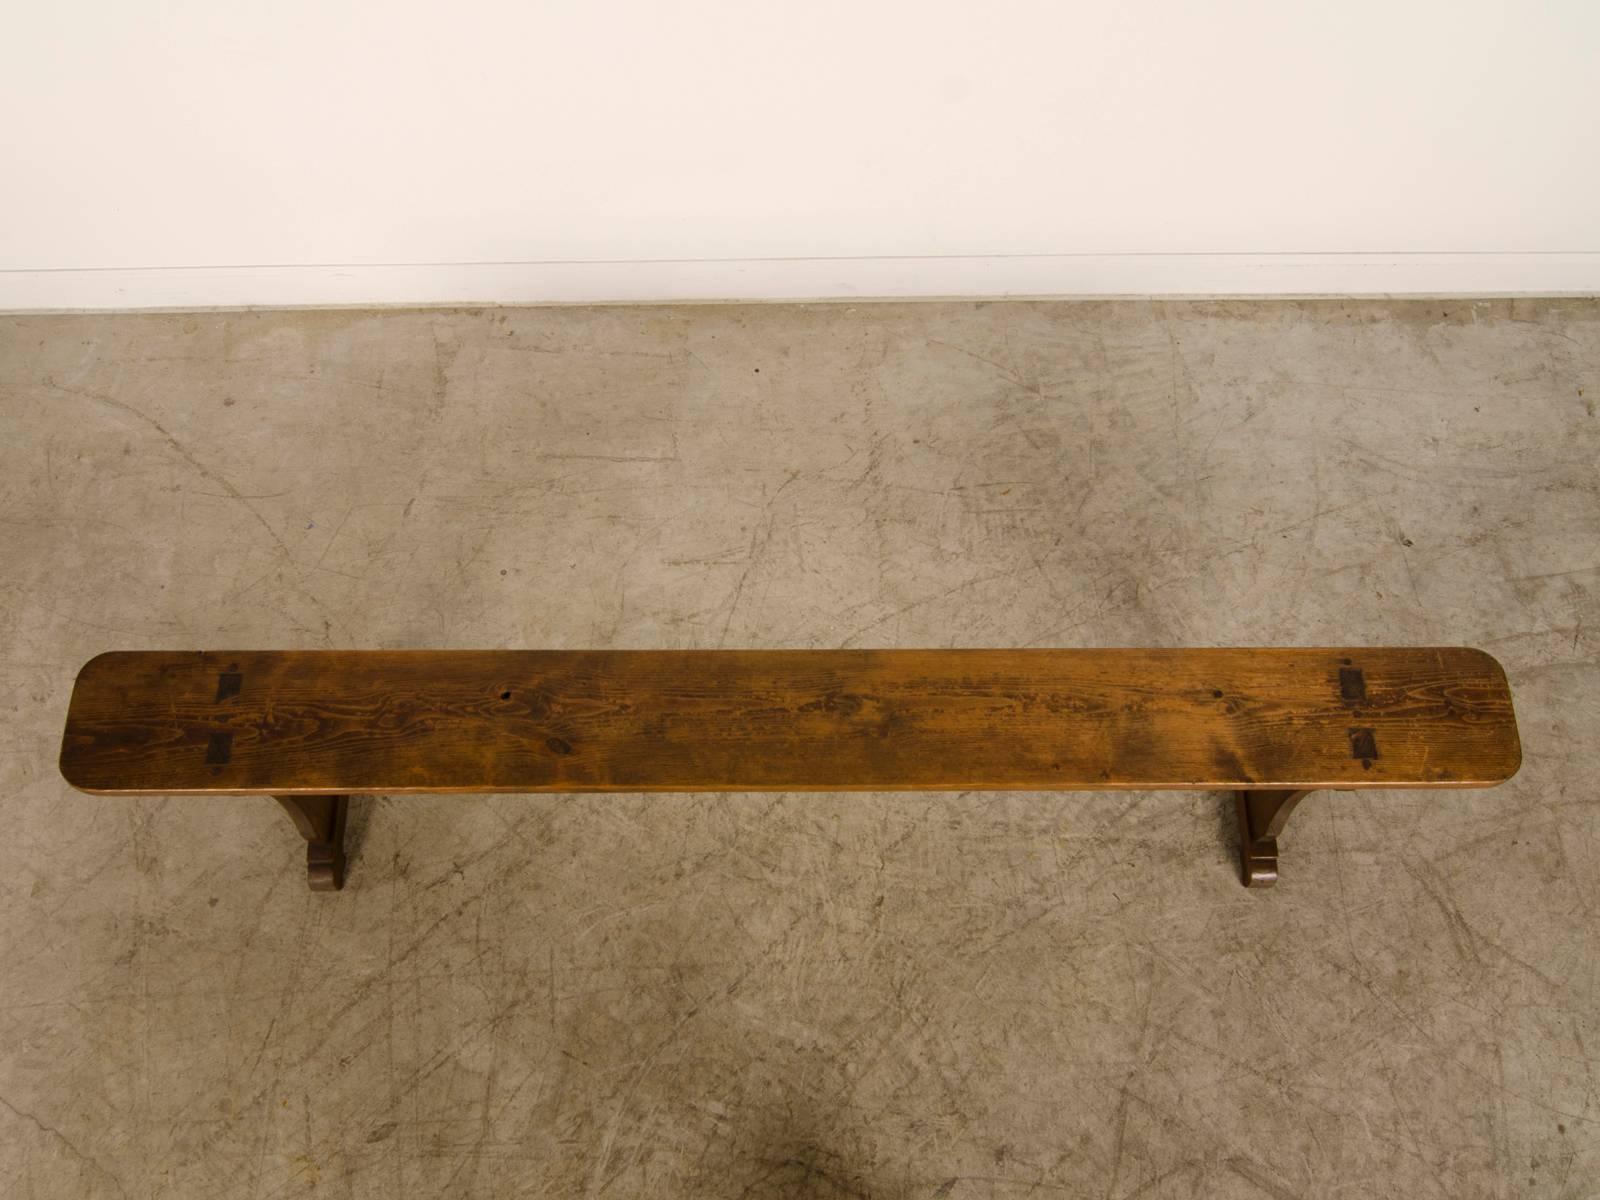 Receive our new selections direct from 1stdibs by email each week. Please click Follow Dealer below and see them first!

Long pine bench from England circa 1840 with a shallow depth. This handsome bench has a top cut from a single tall tree that